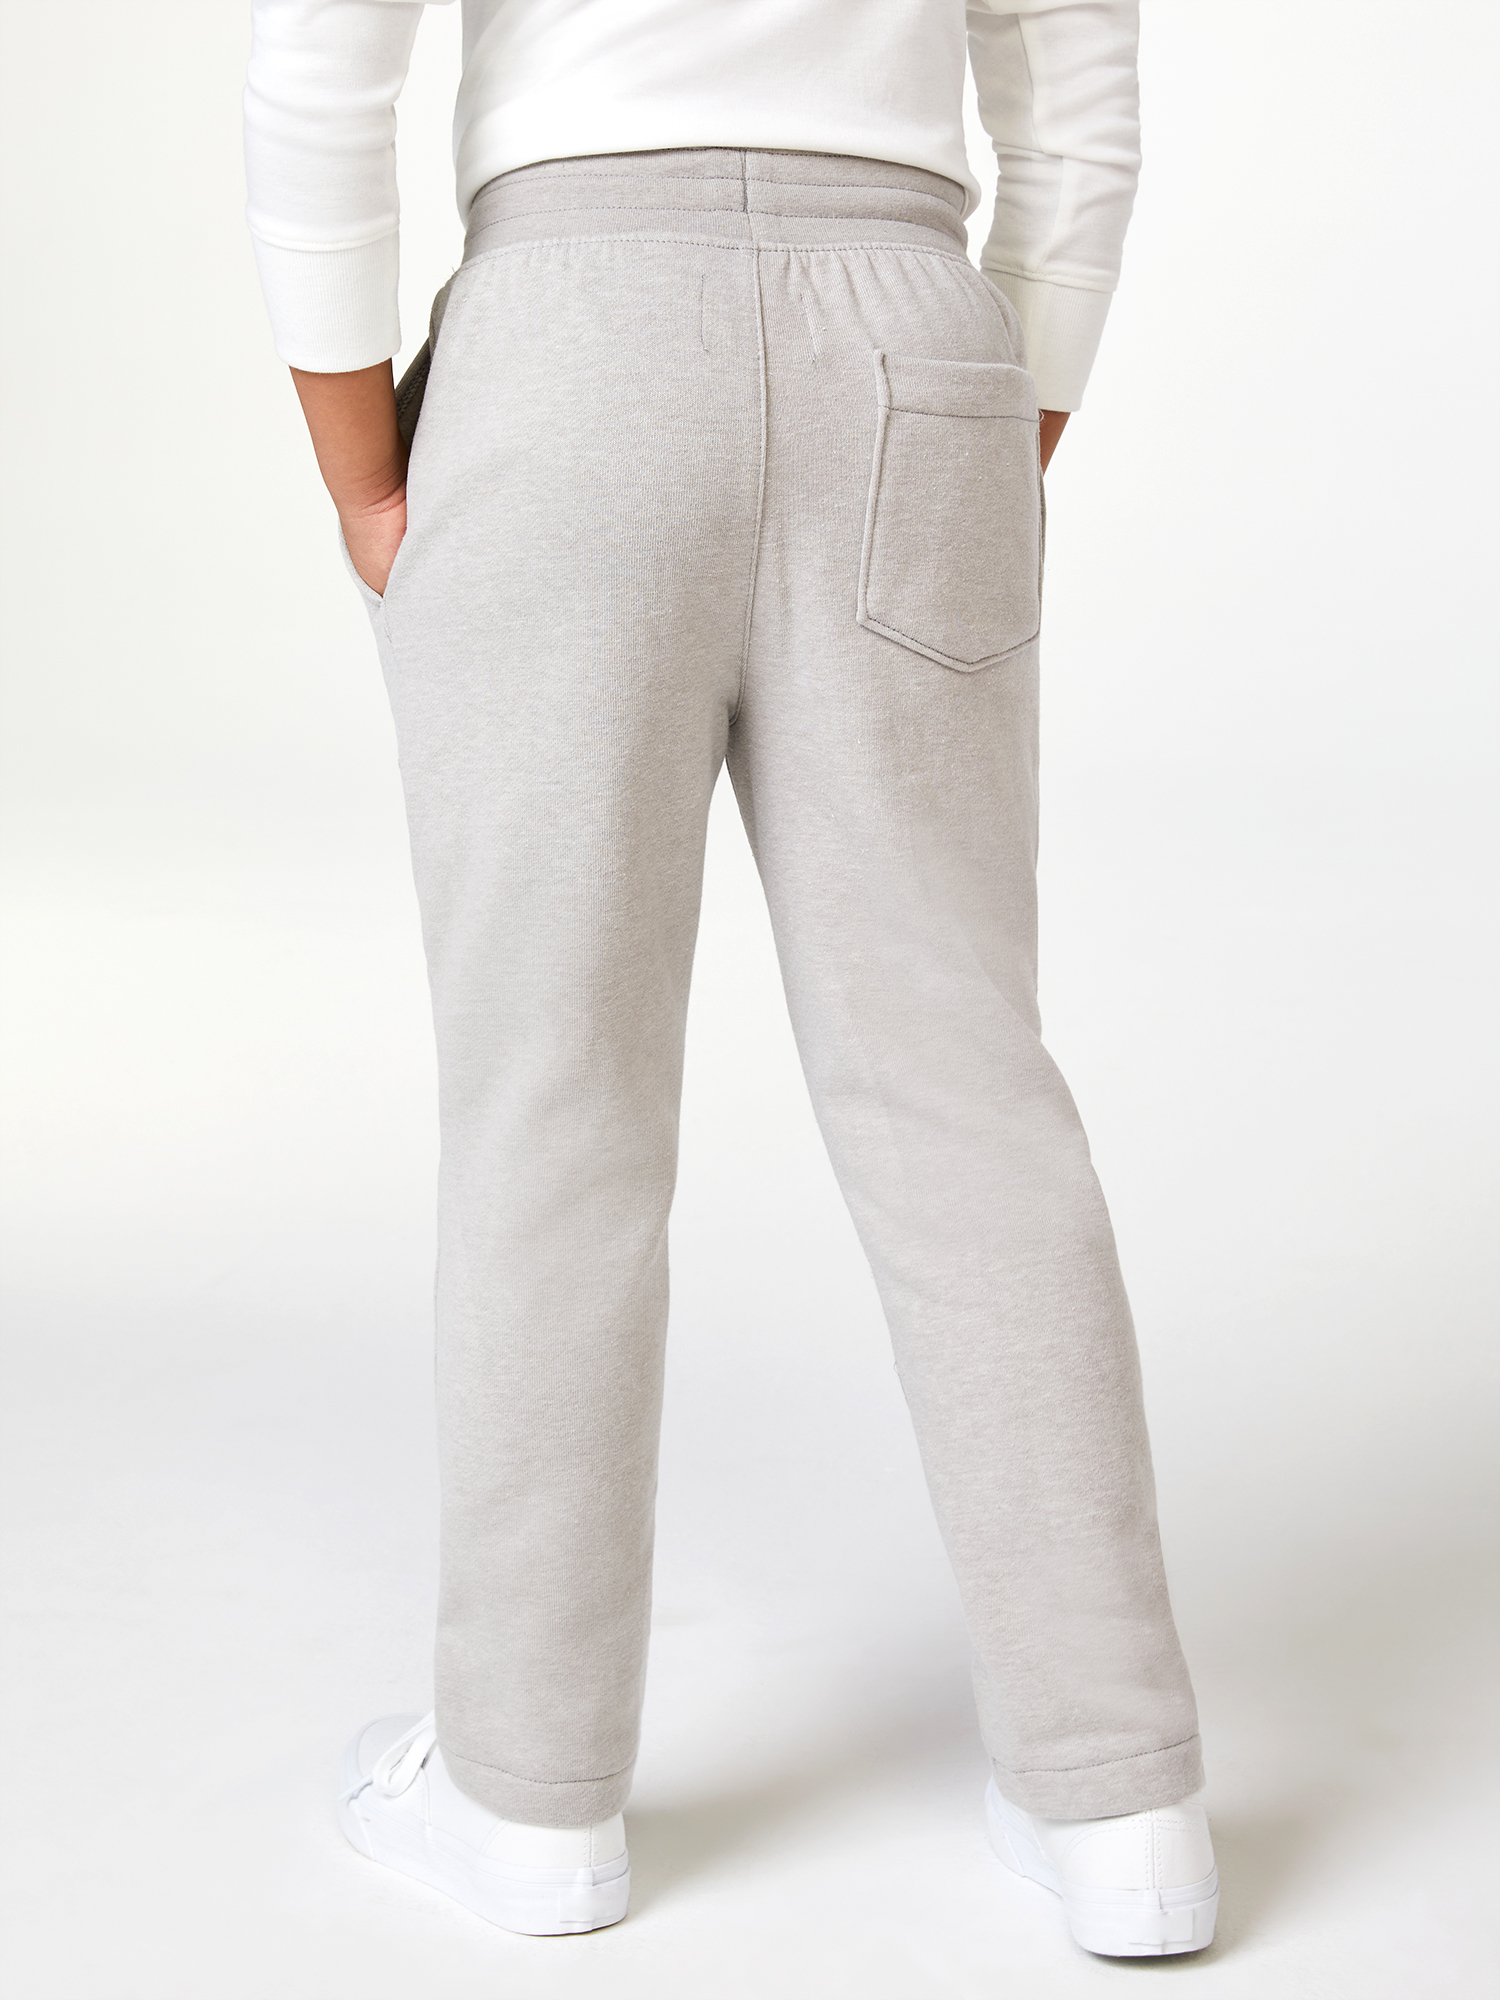 Free Assembly Boys Fleece Fatigue Pants, Sizes 4-18 - image 3 of 5